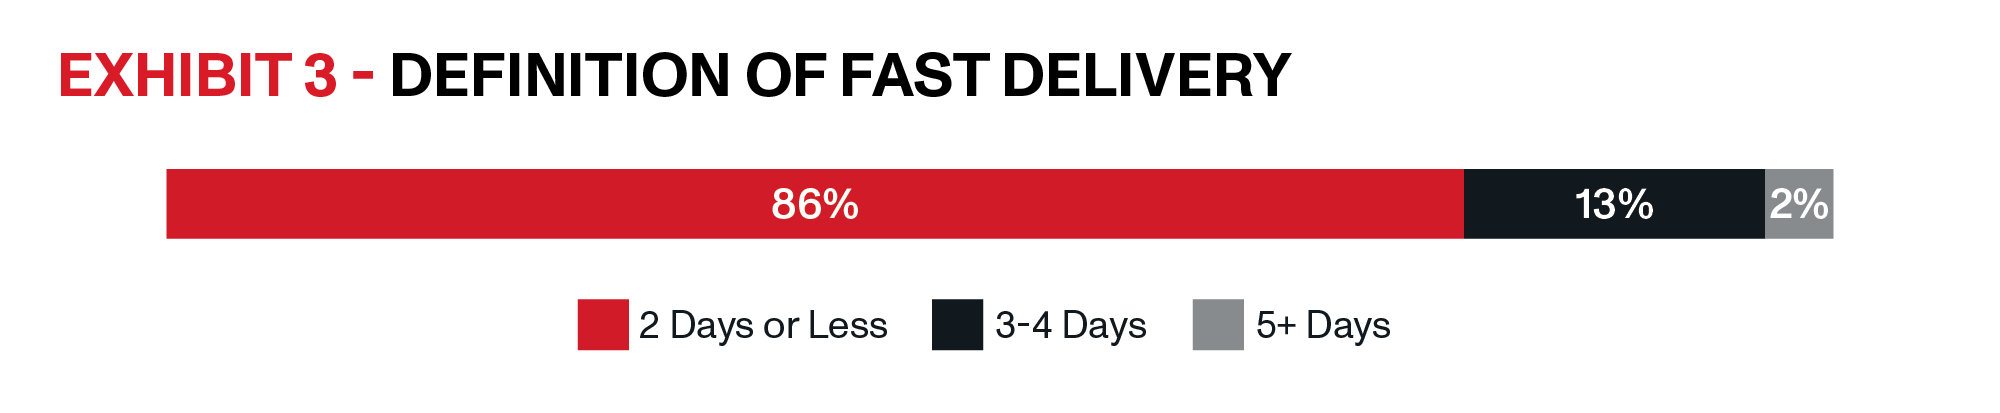 OnTrac | Last Mile Delivery Whitepaper | Exhibit 3 | Eighty-six percent of consumers define fast delivery as two days or less.